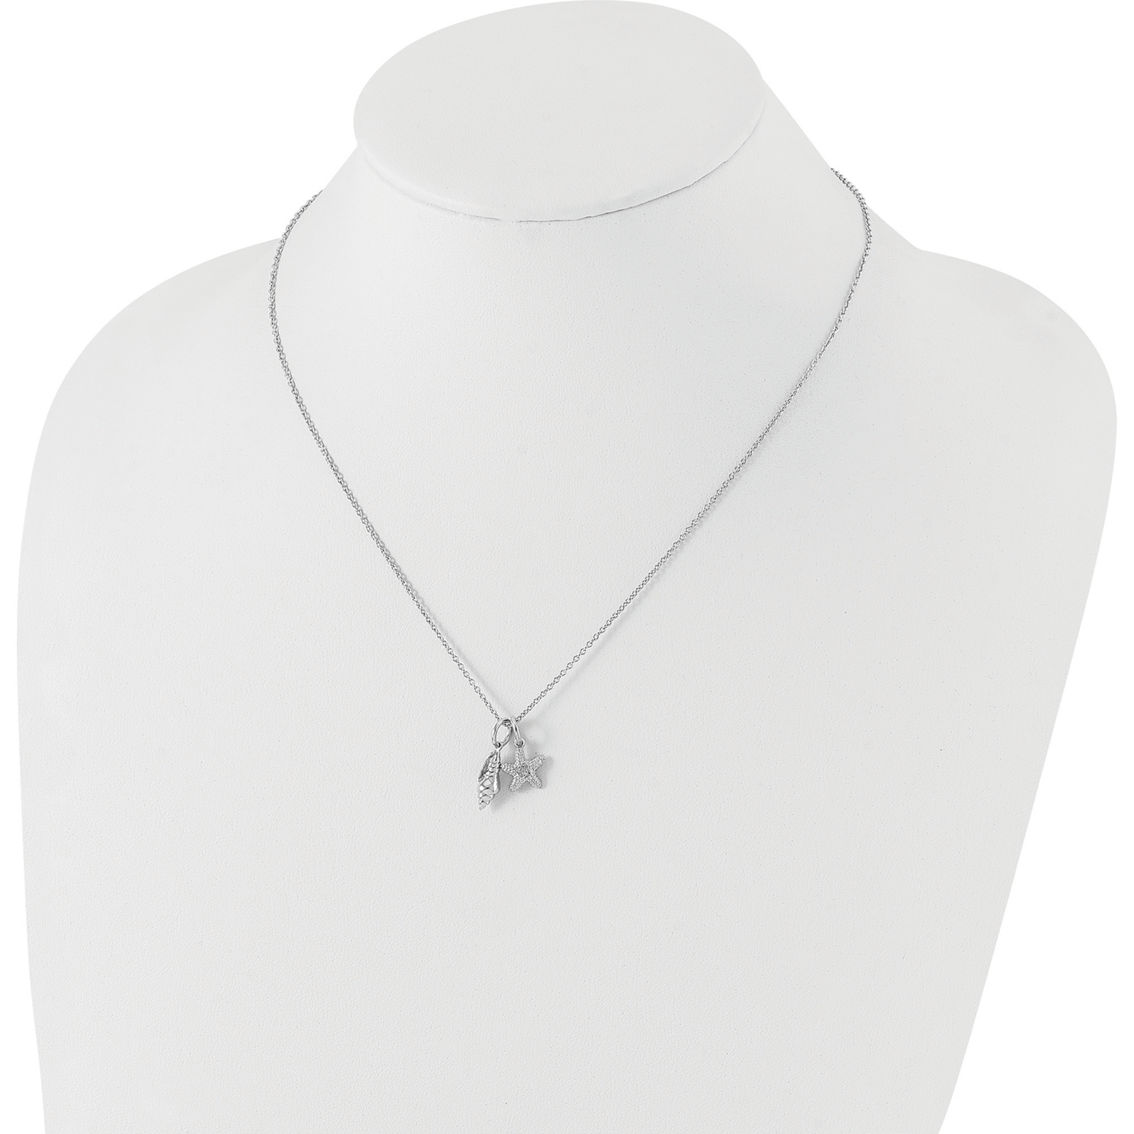 White Ice Sterling Silver Diamond Accent Shell and Starfish Pendant Necklace - Image 3 of 3